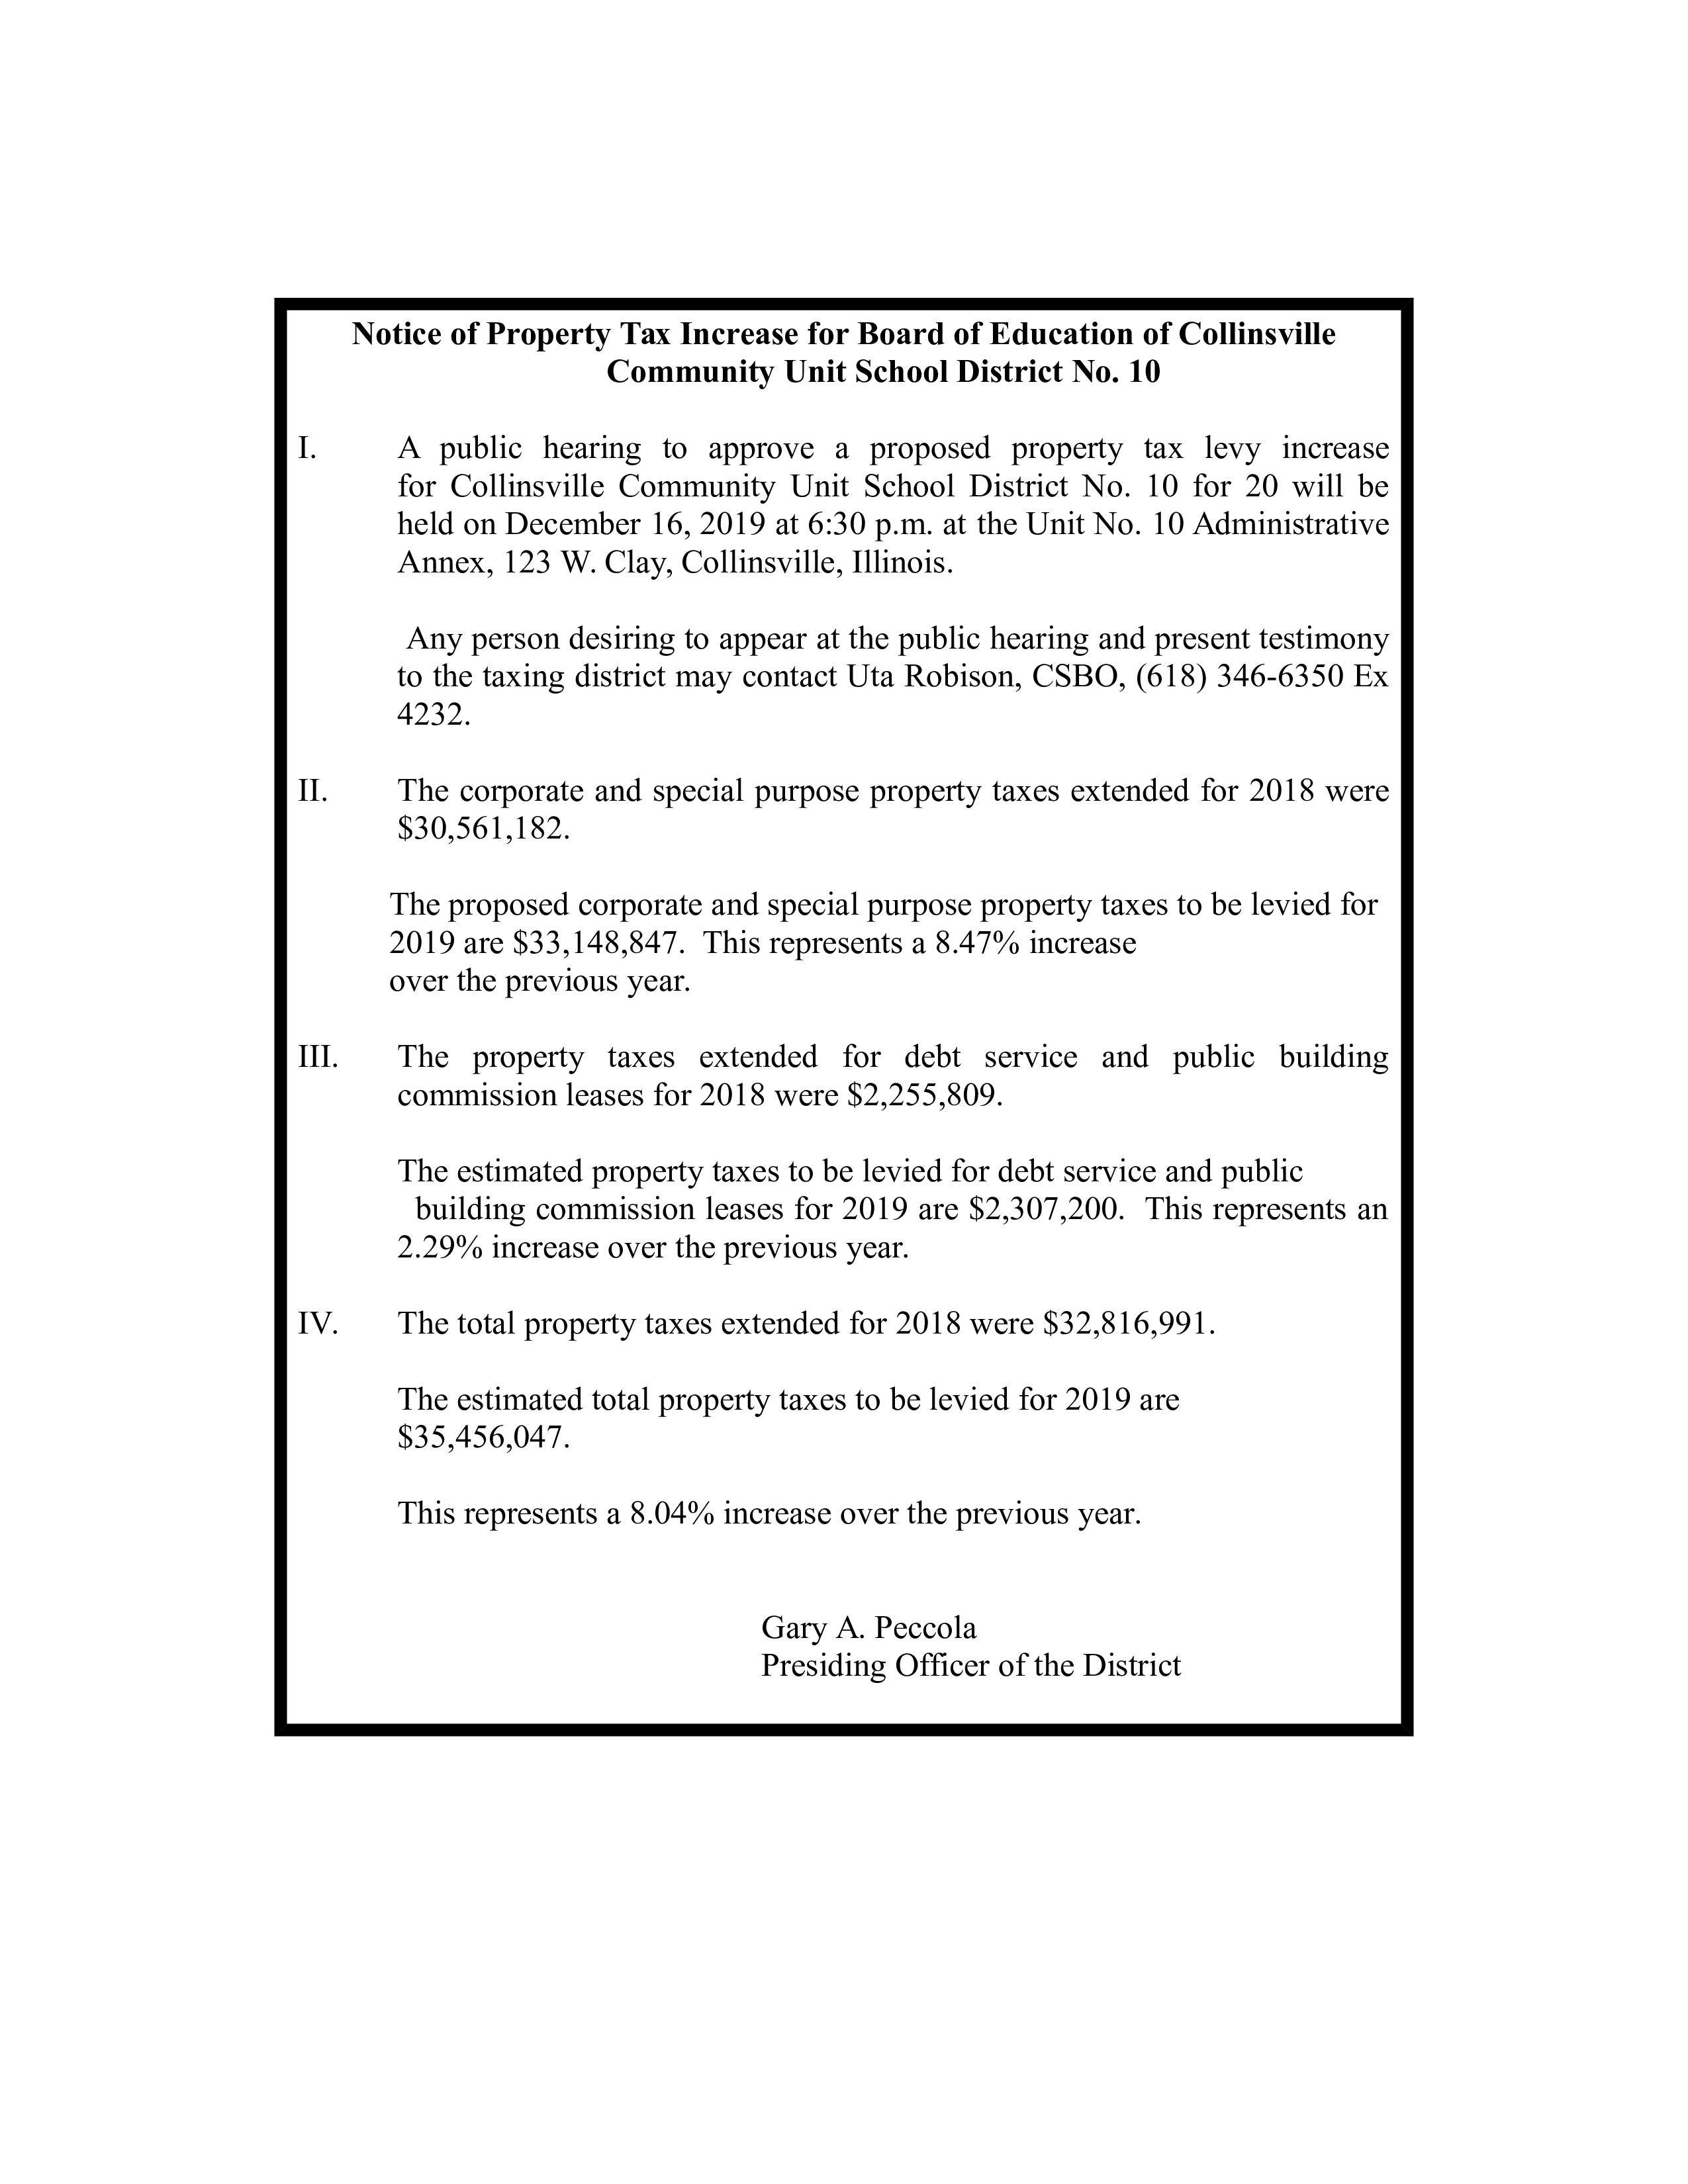 Notice of Taxation Hearing December 16, 2019